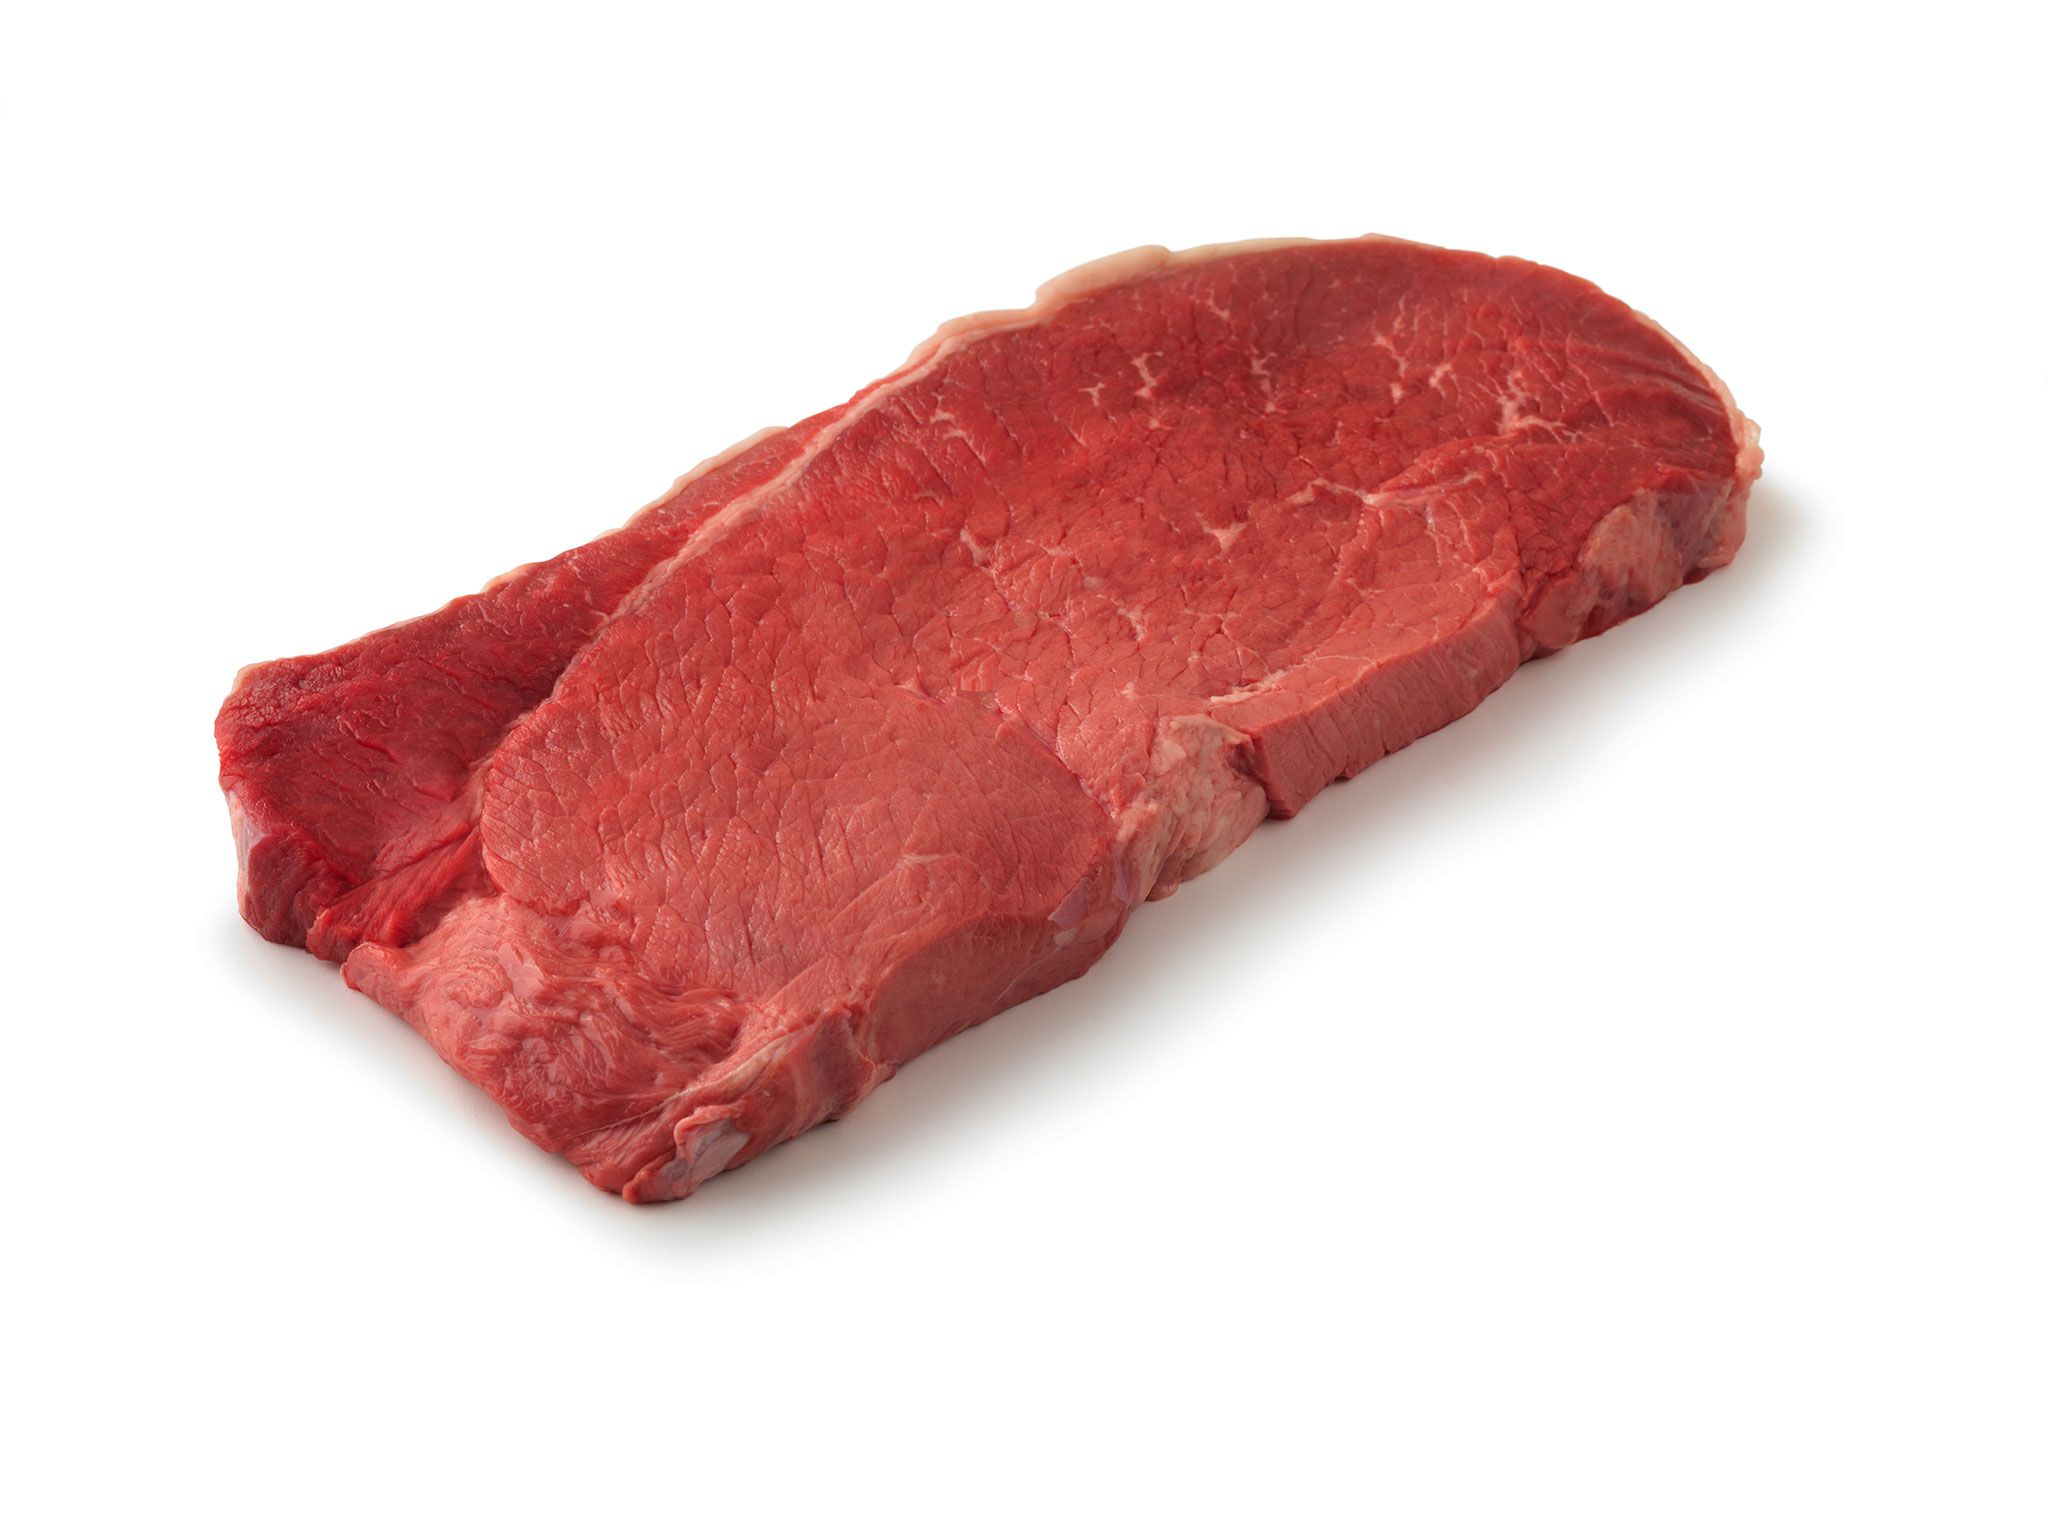 Cheap Meat 101: Feed Your Family on a Budget with These Tips!